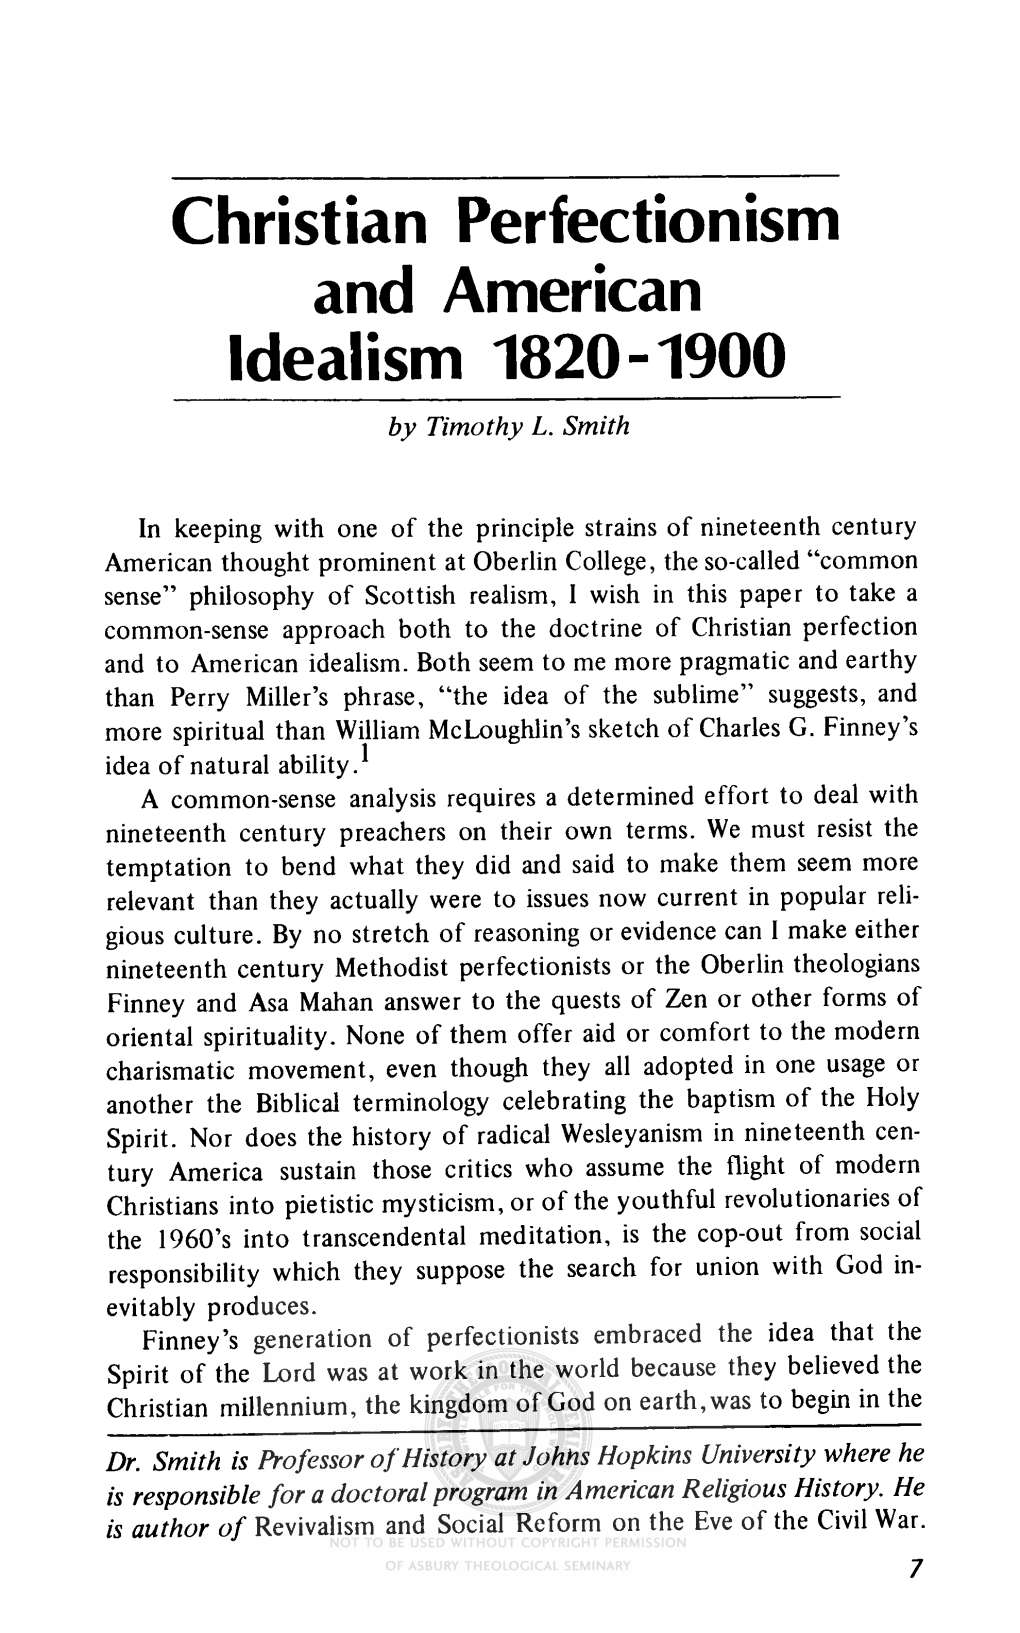 Christian Perfectionism and American Idealism 1820-1900